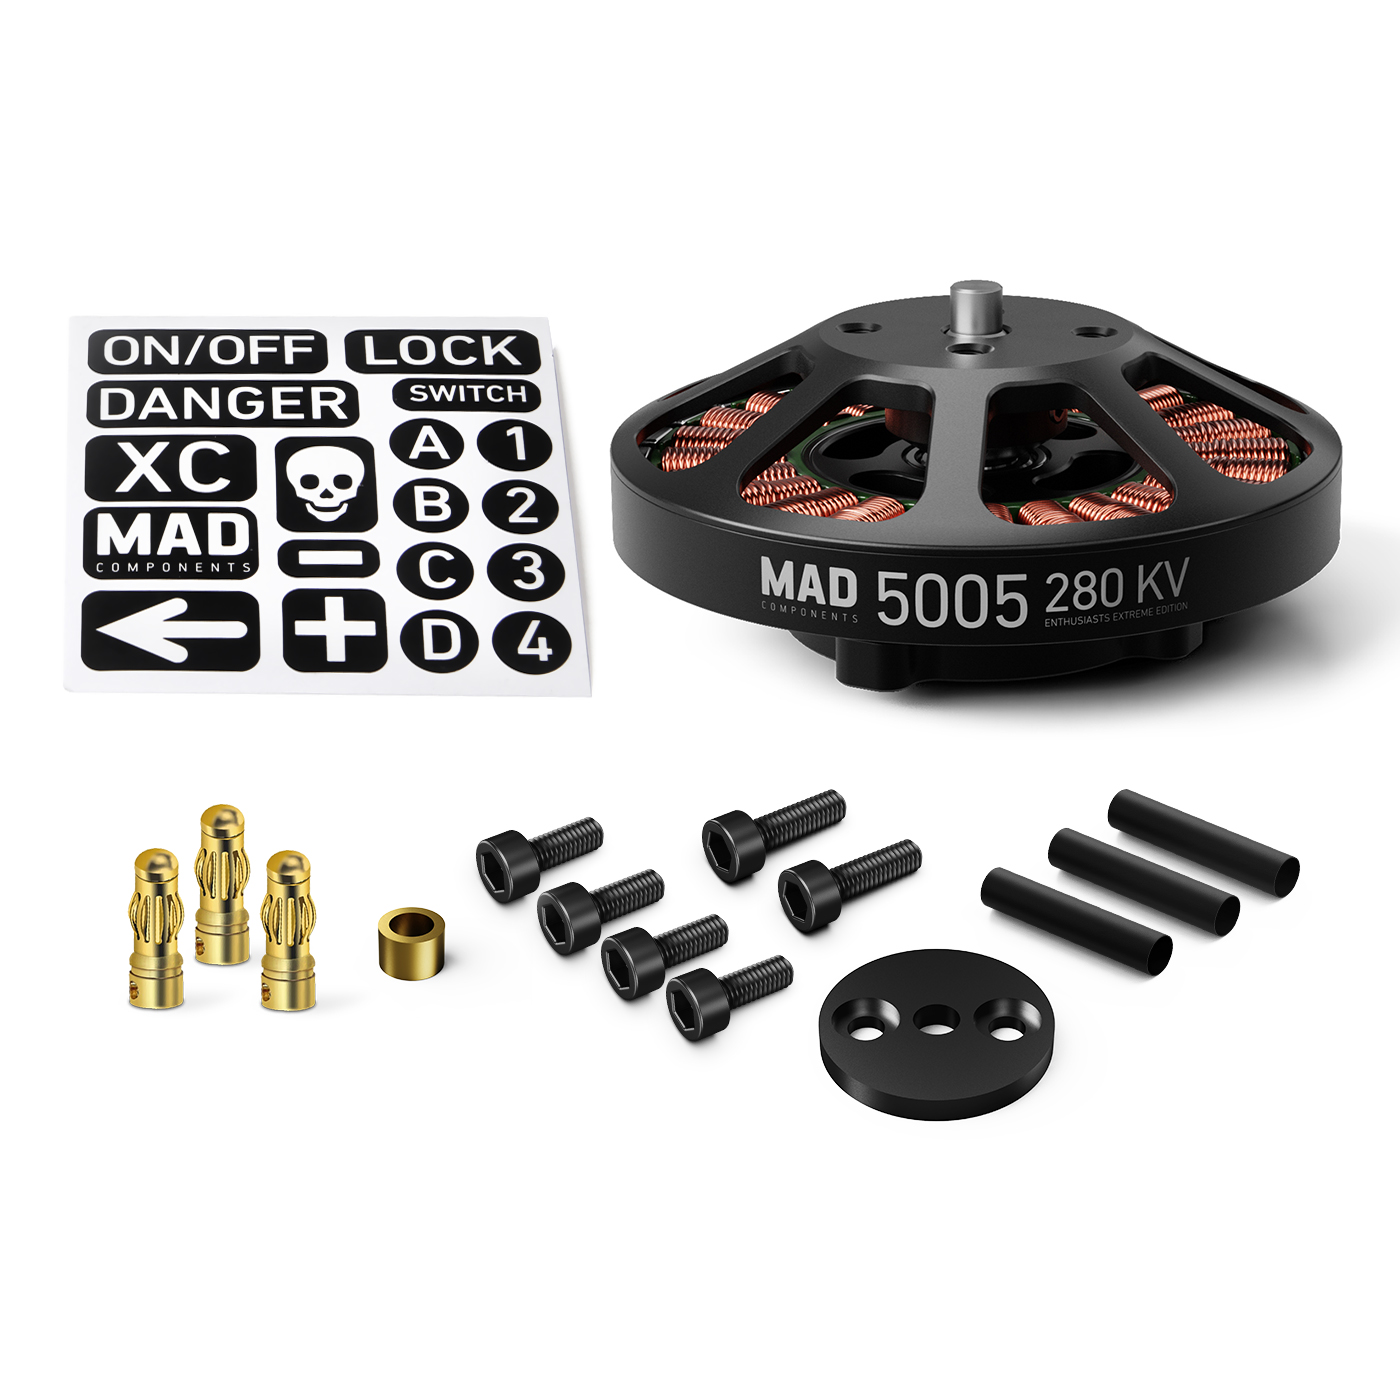 MAD 5005 EEE brushless motor for the long-range inspection drone mapping drone surveying drone quadcopter hexcopter mulitirotor